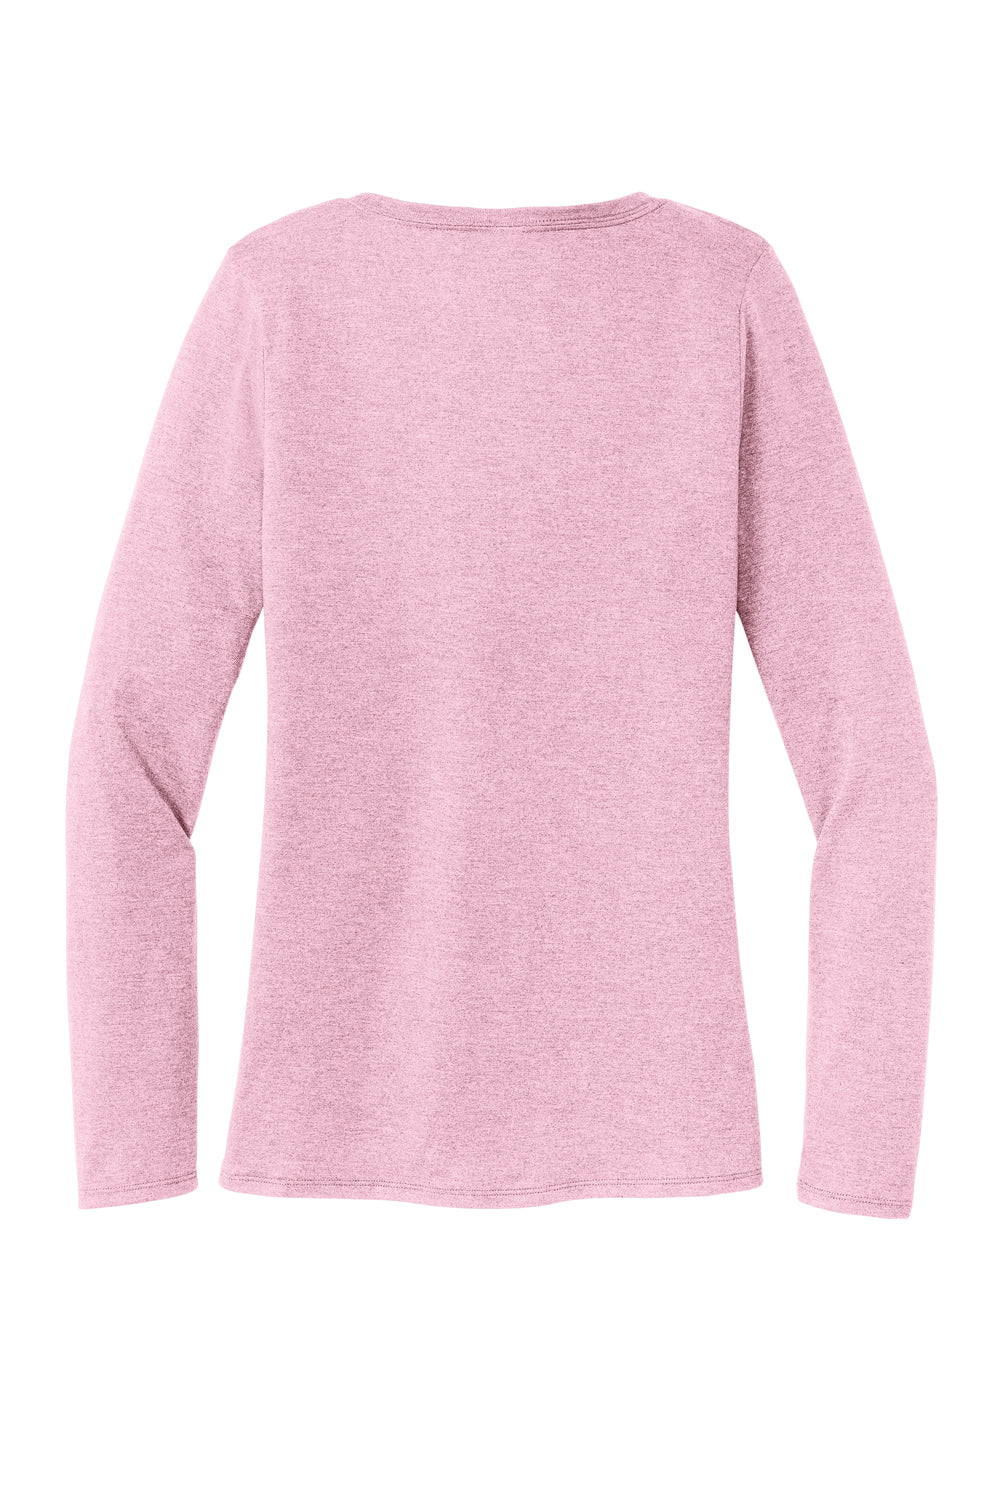 District DT135 Womens Perfect Tri Long Sleeve V-Neck T-Shirt Heather Wisteria Pink Flat Back